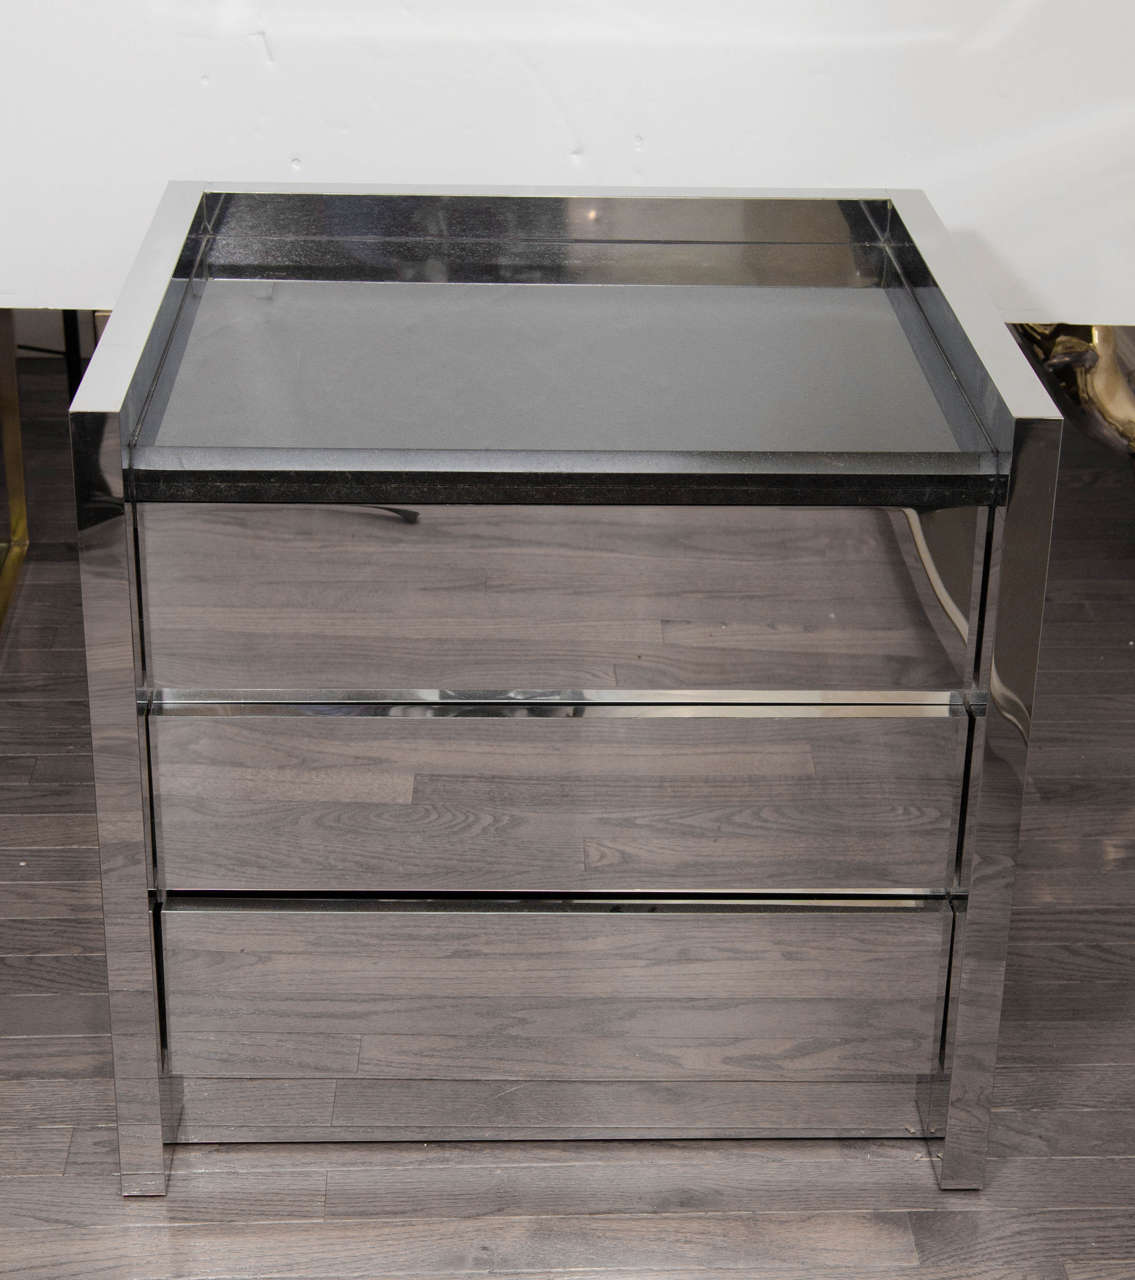 Polished stainless steel chest of drawers with granite top.